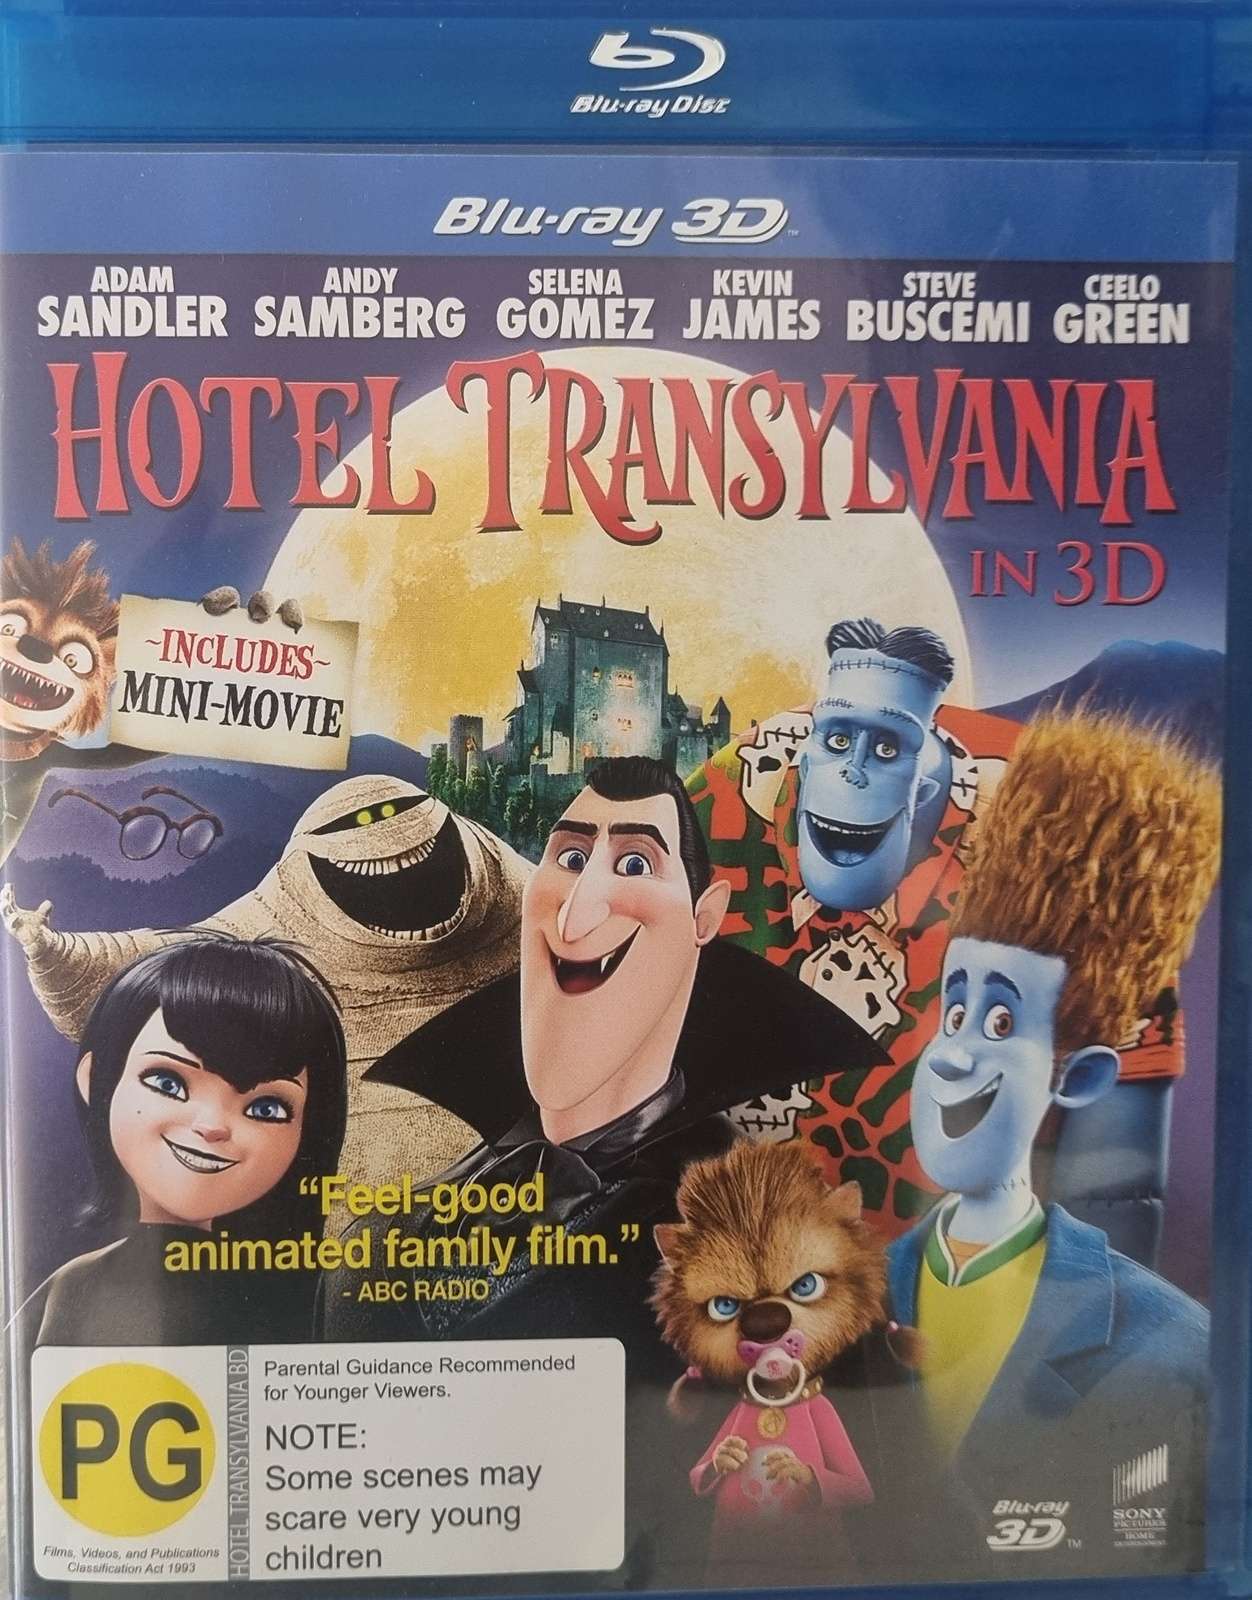 Hotel Transylvania in 3D (Blu Ray) 3D player required